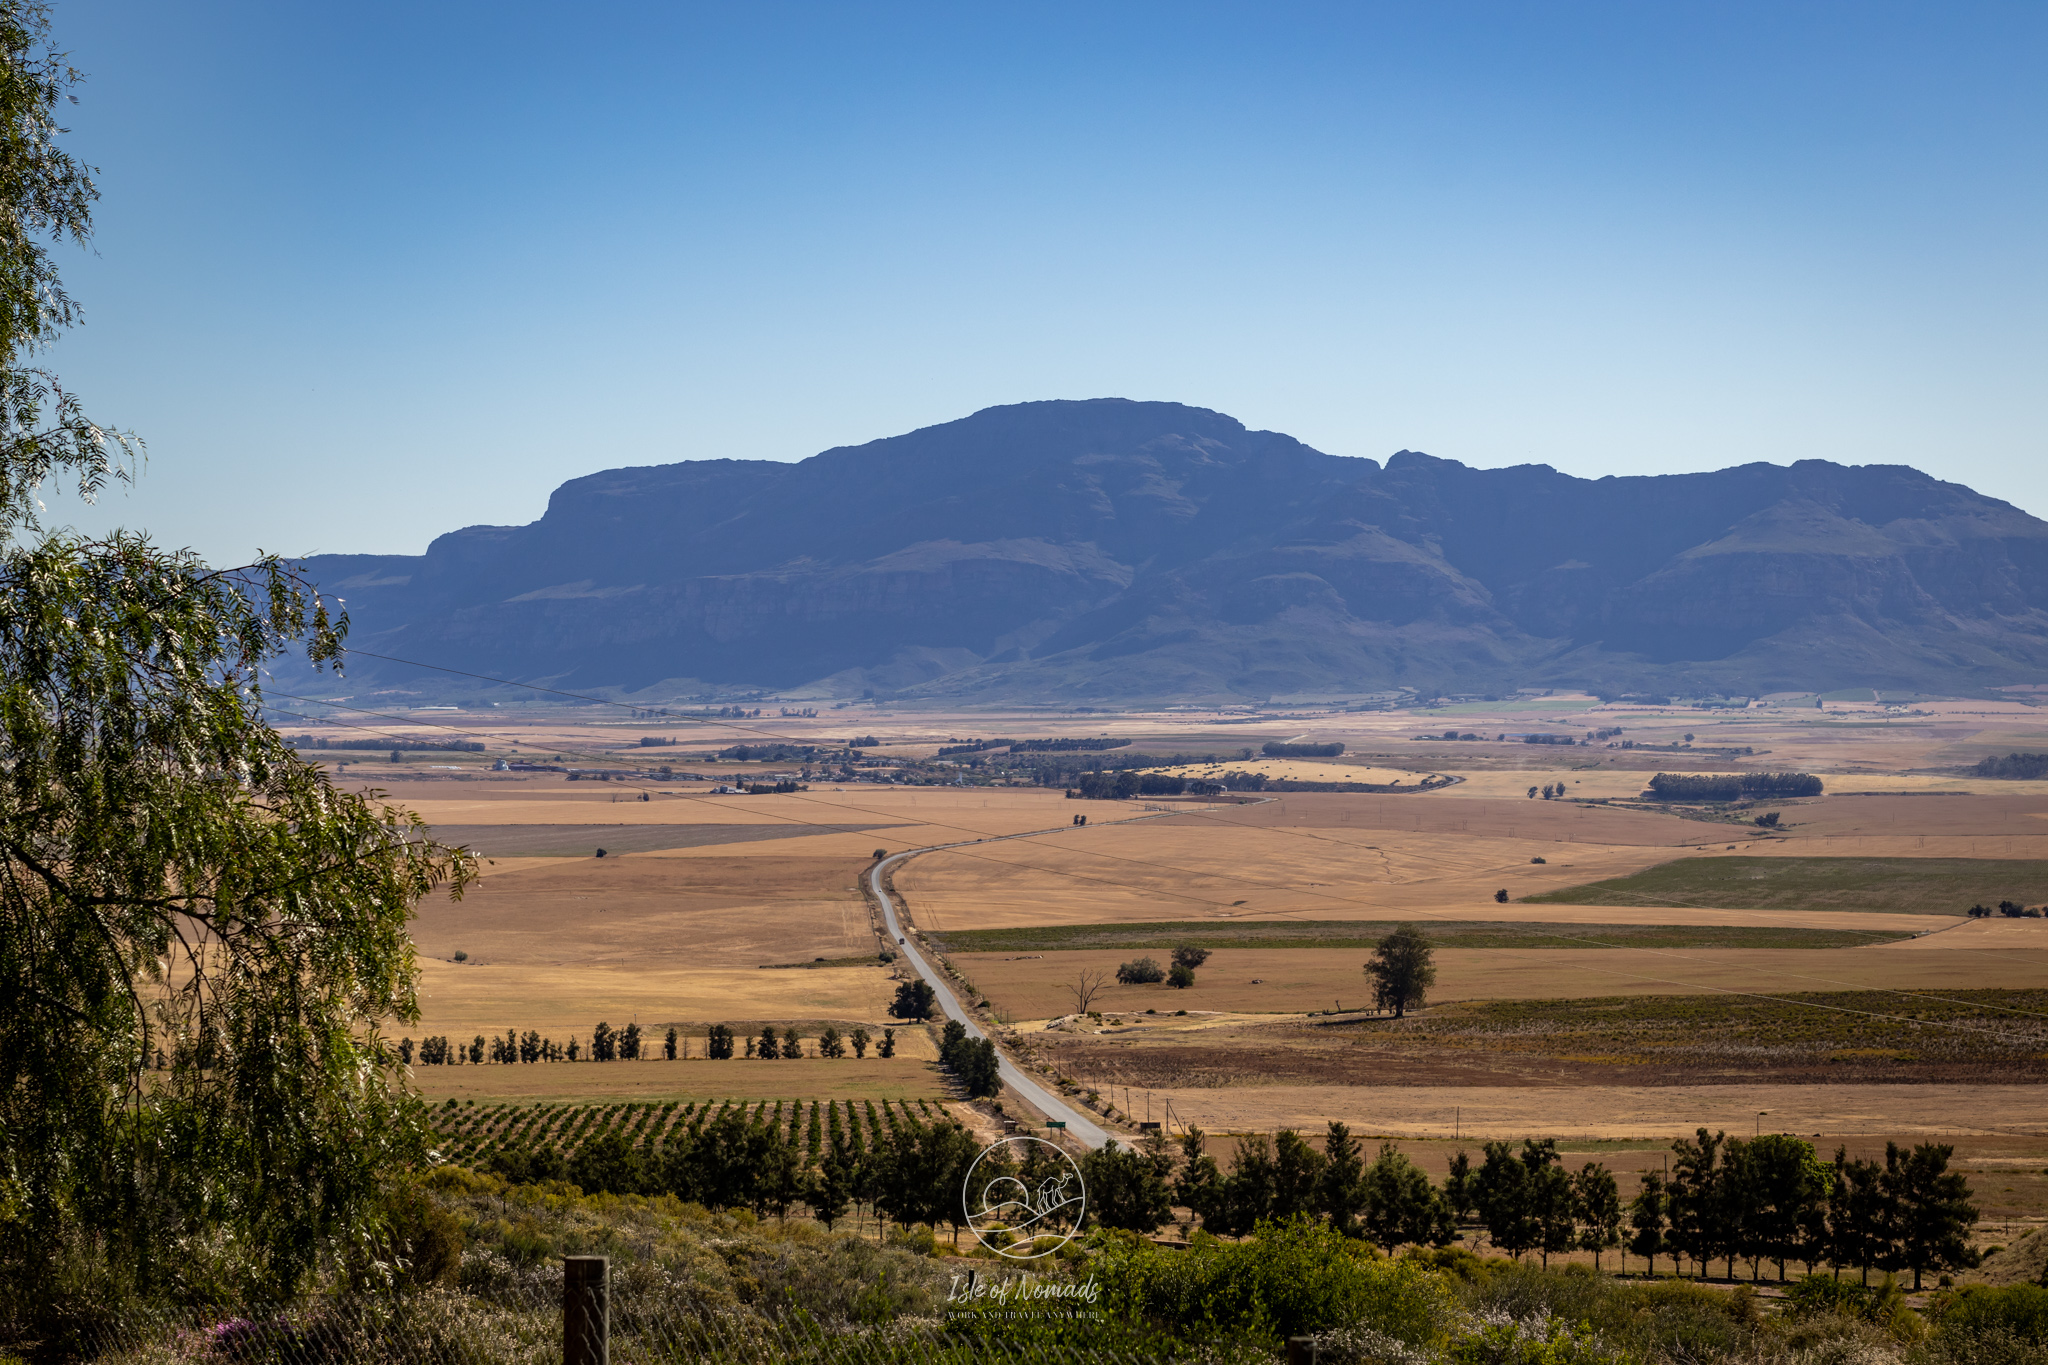 Southern Africa has many scenic routes